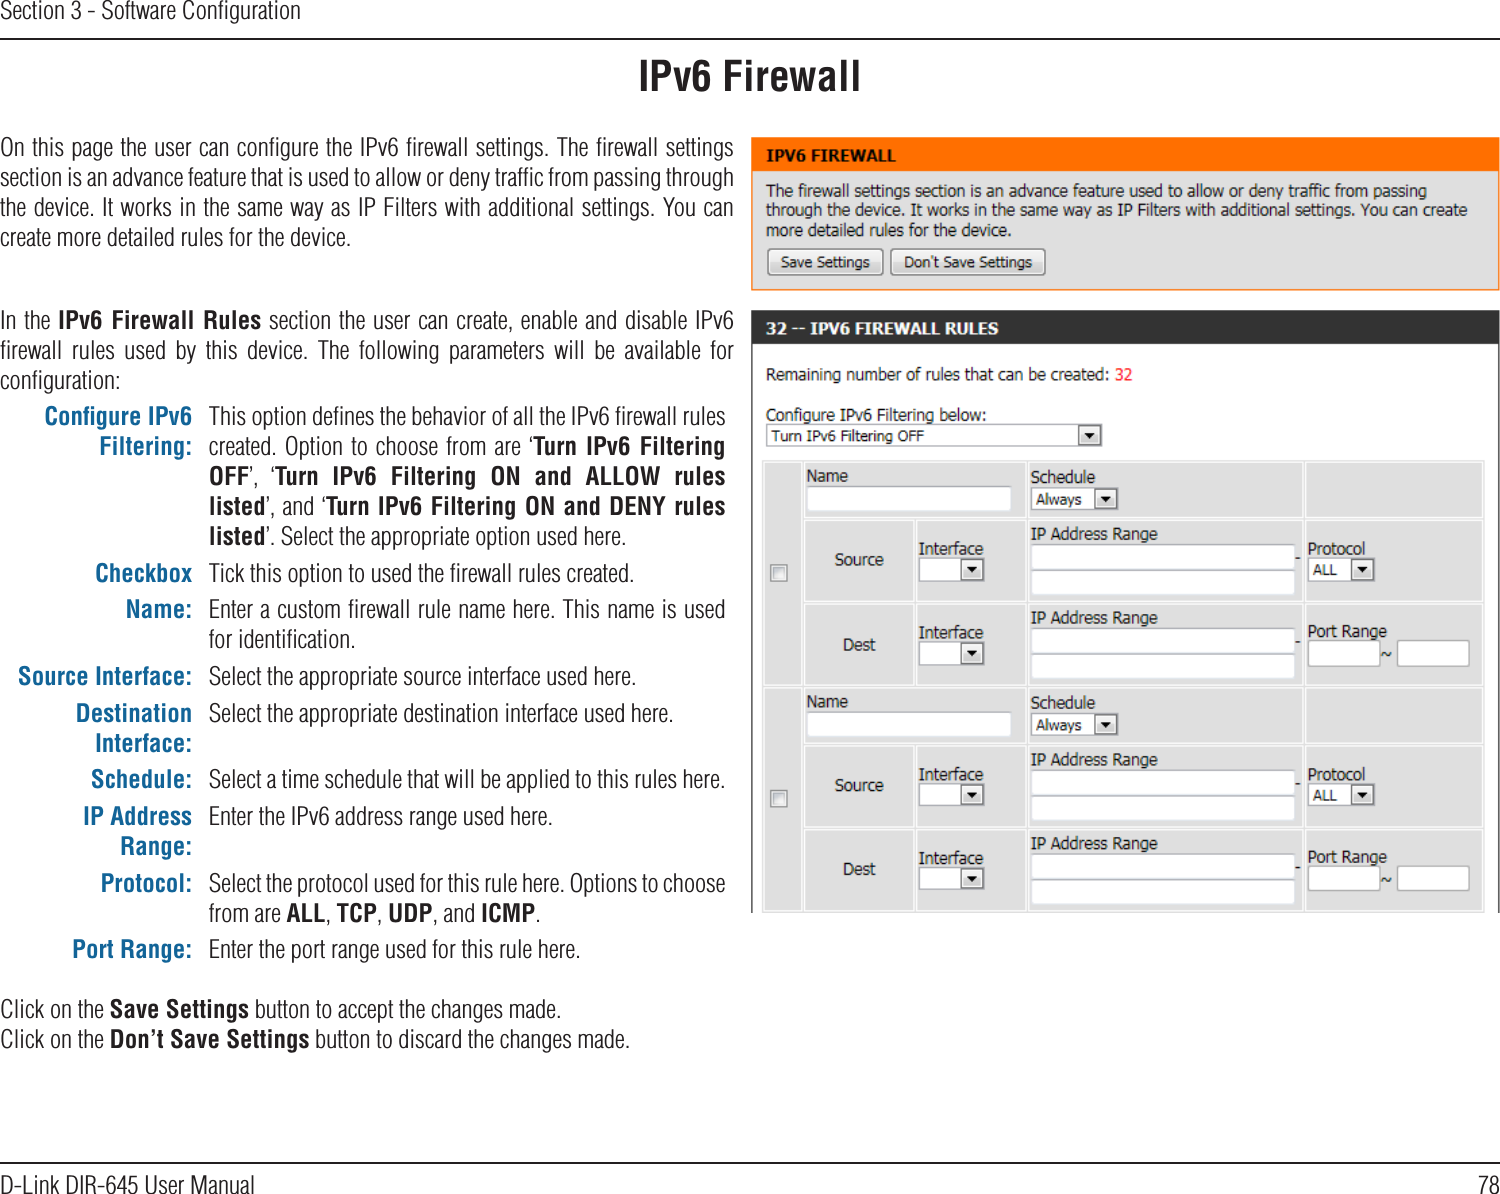 78D-Link DIR-645 User ManualSection 3 - Software ConﬁgurationIPv6 FirewallOn this page the user can conﬁgure the IPv6 ﬁrewall settings. The ﬁrewall settings section is an advance feature that is used to allow or deny trafﬁc from passing through the device. It works in the same way as IP Filters with additional settings. You can create more detailed rules for the device.In the IPv6 Firewall Rules section the user can create, enable and disable IPv6 ﬁrewall  rules  used  by  this  device.  The  following  parameters  will  be  available  for conﬁguration:Conﬁgure IPv6 Filtering:This option deﬁnes the behavior of all the IPv6 ﬁrewall rules created. Option to choose from are ‘Turn  IPv6  Filtering OFF’,  ‘Turn  IPv6  Filtering  ON  and  ALLOW  rules listed’, and ‘Turn IPv6 Filtering ON and DENY rules listed’. Select the appropriate option used here.Checkbox Tick this option to used the ﬁrewall rules created.Name: Enter a custom ﬁrewall rule name here. This name is used for identiﬁcation.Source Interface: Select the appropriate source interface used here.Destination Interface:Select the appropriate destination interface used here.Schedule: Select a time schedule that will be applied to this rules here.IP Address Range:Enter the IPv6 address range used here.Protocol: Select the protocol used for this rule here. Options to choose from are ALL, TCP, UDP, and ICMP.Port Range: Enter the port range used for this rule here.Click on the Save Settings button to accept the changes made.Click on the Don’t Save Settings button to discard the changes made.